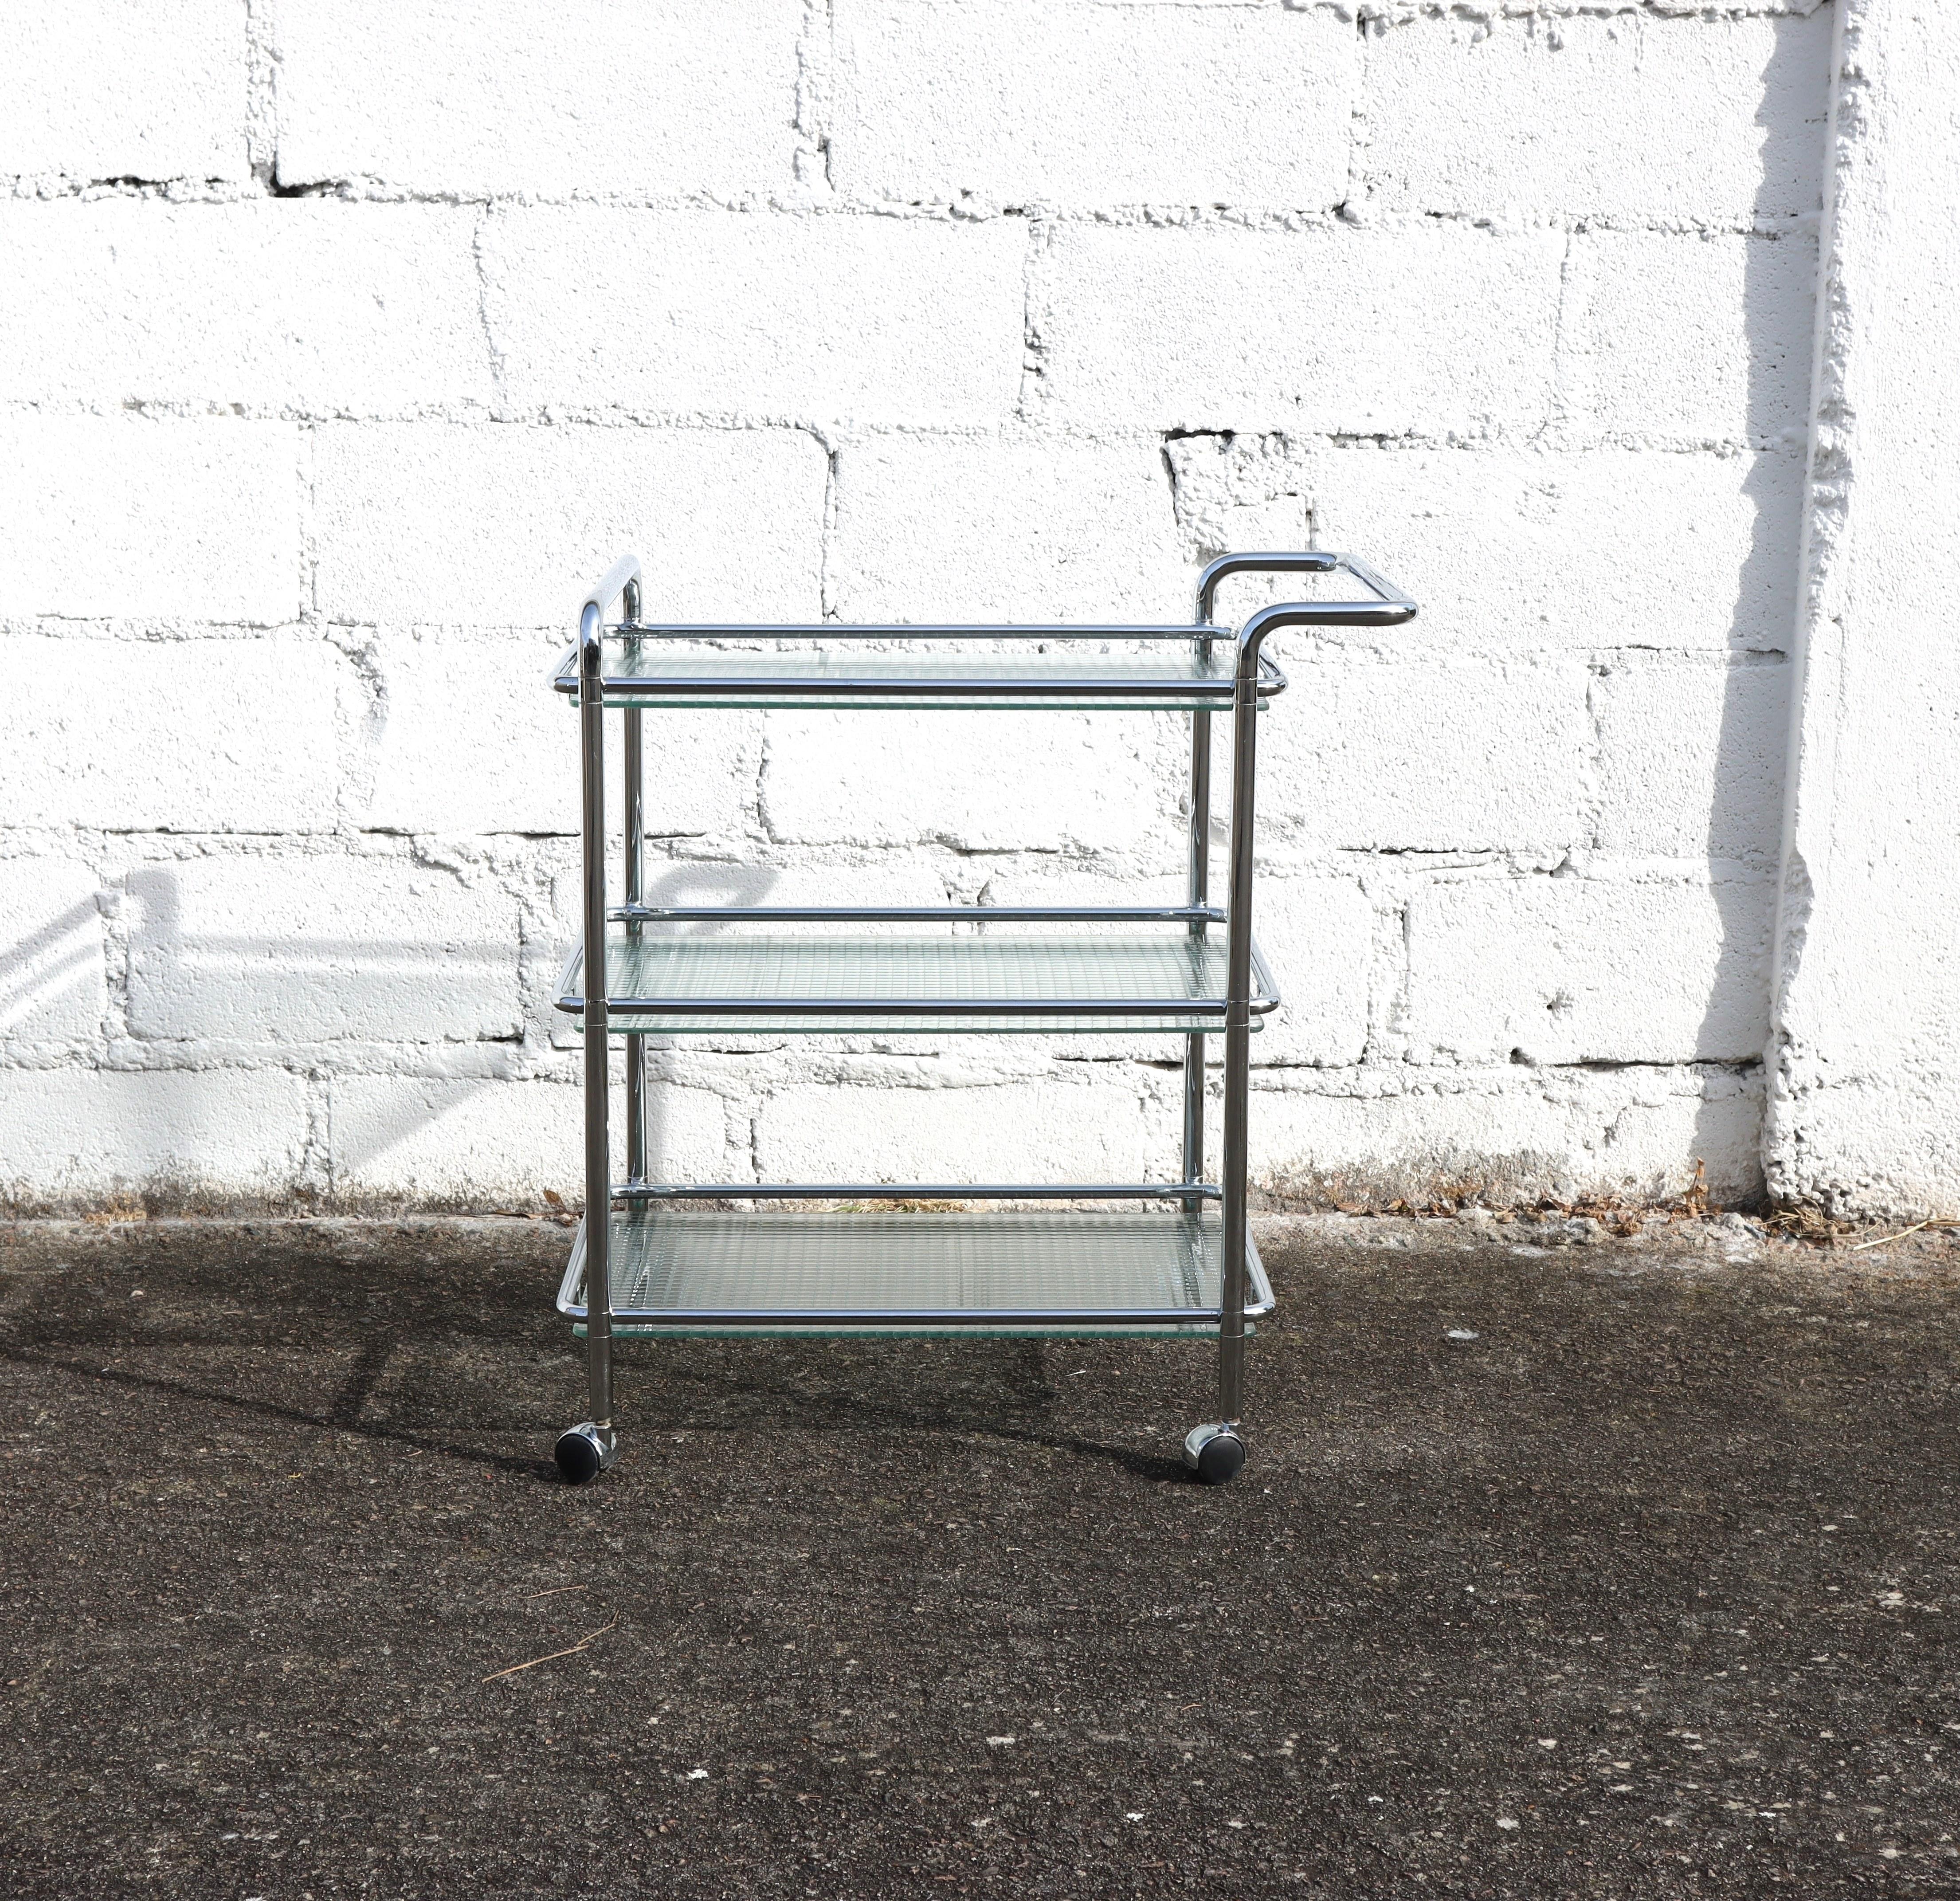 Vintage Postmodern three Tier Chrome Glass Serving Trolley from from the End of the 80s

Heavy Wire Glass Panels in a Space Age Style Chrome tubular Frame.
Functional and versatile - ideal Serving Trolley for your Living Area or Patio.
wonderful